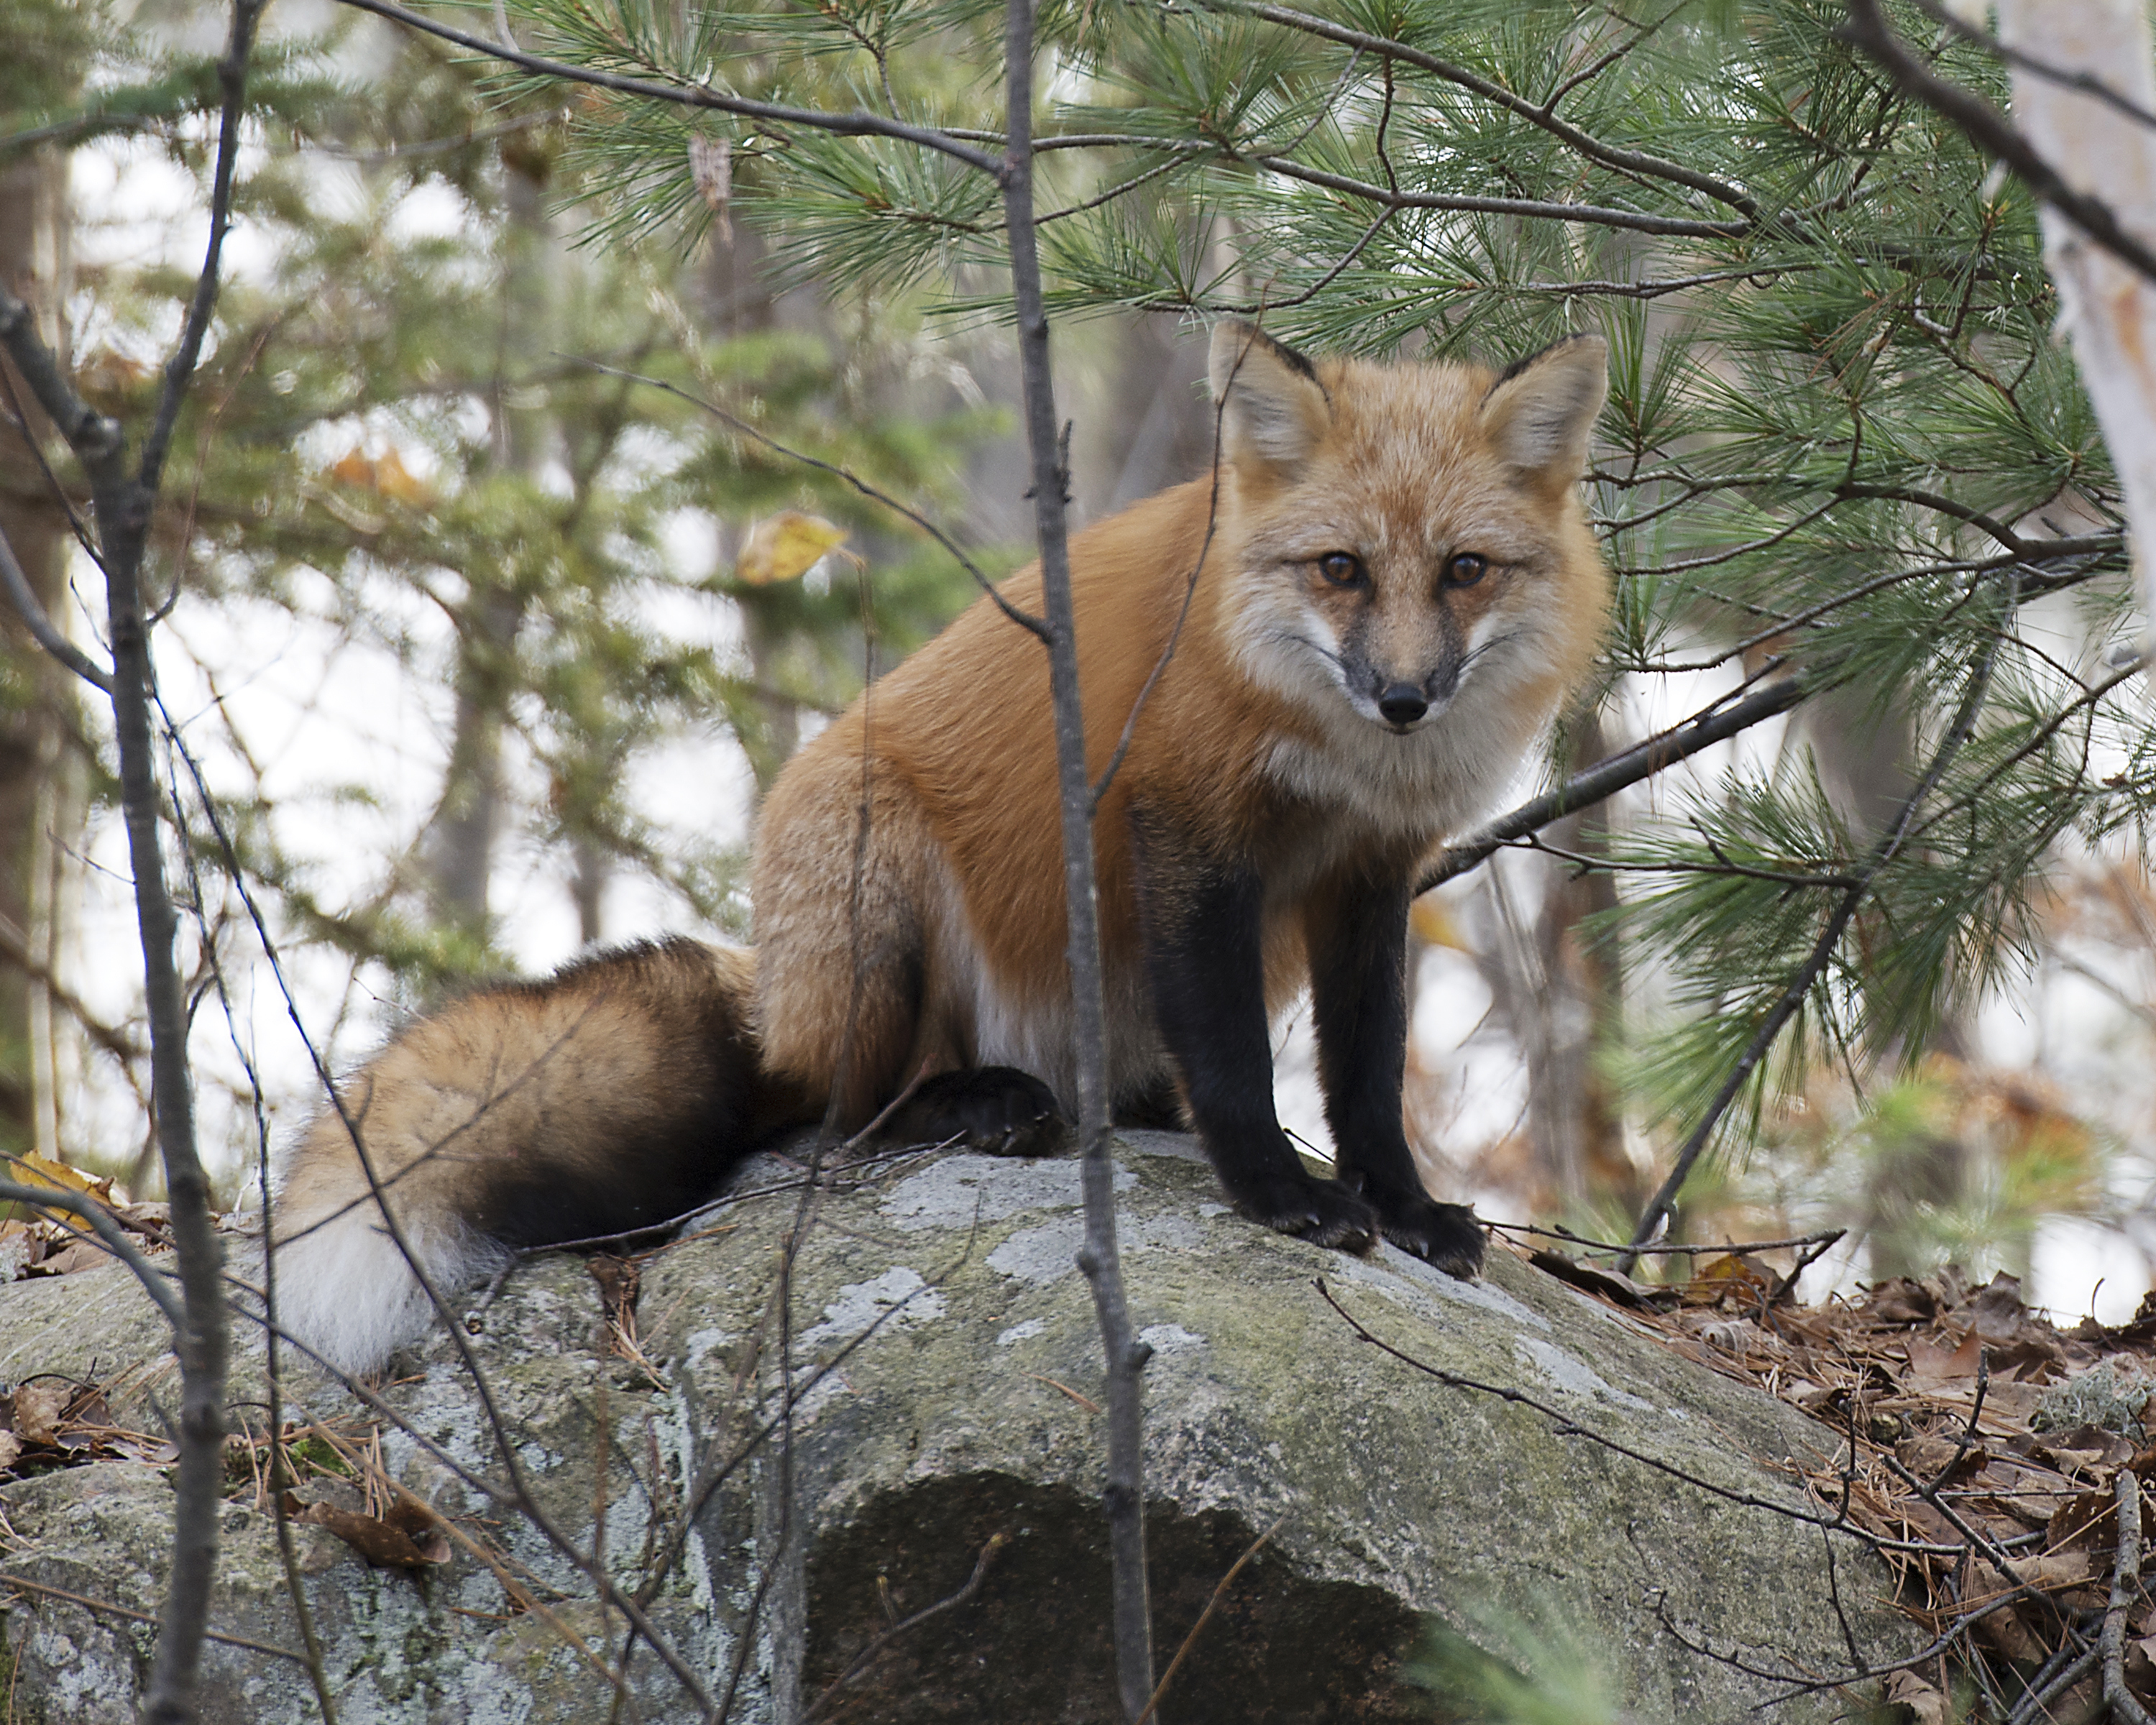 See the local Red Fox in the area.